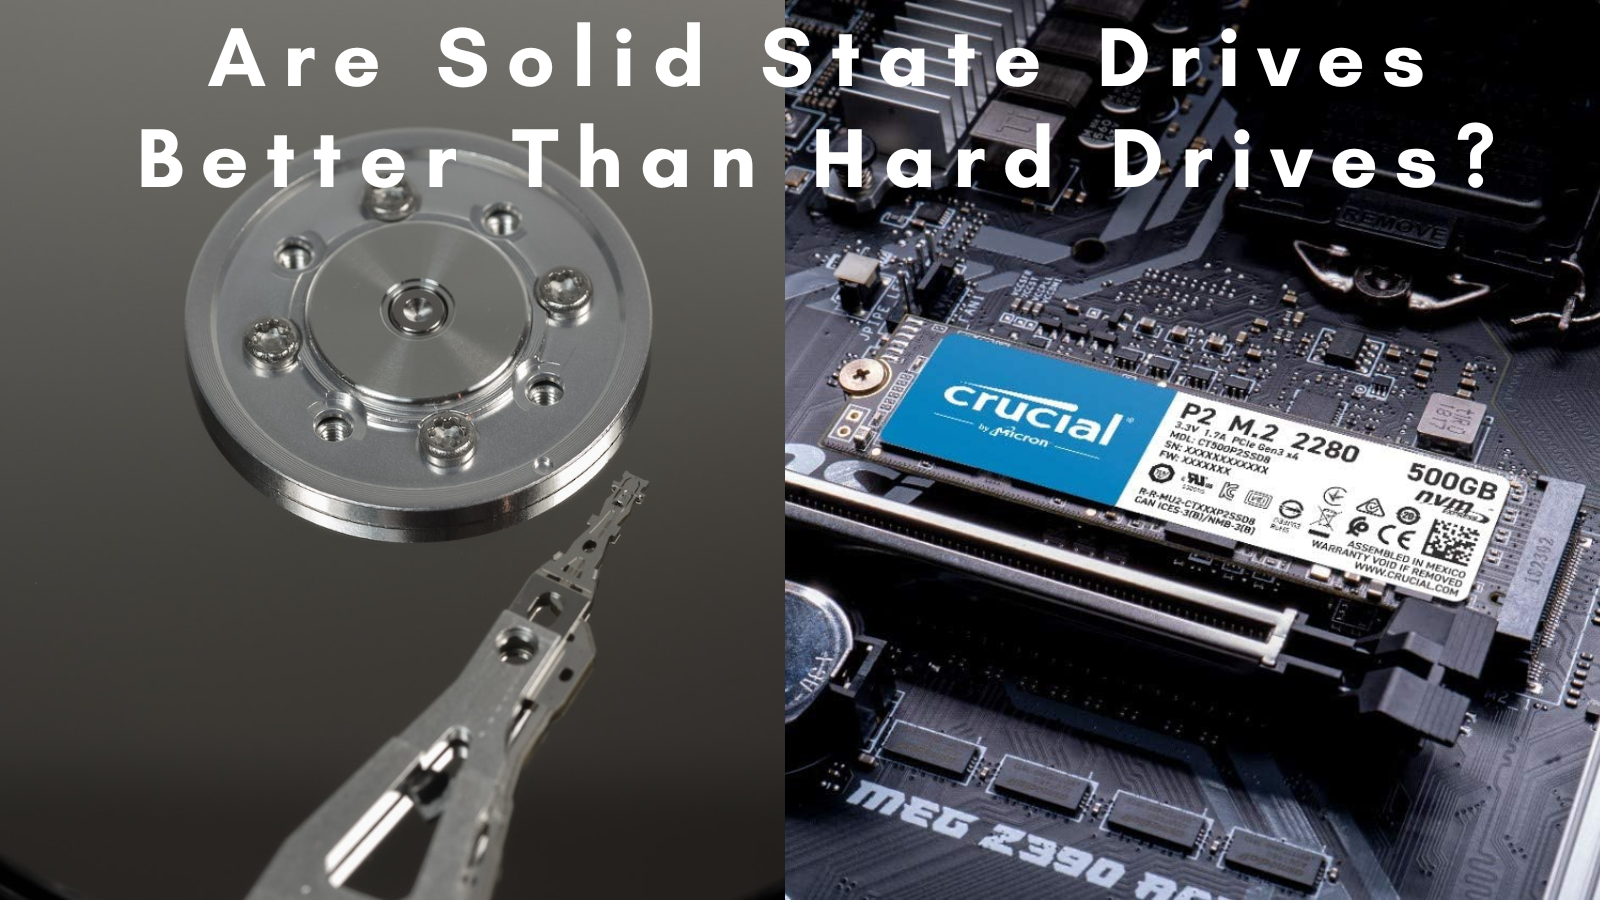 Are Solid State Drives Better Than Hard Drives